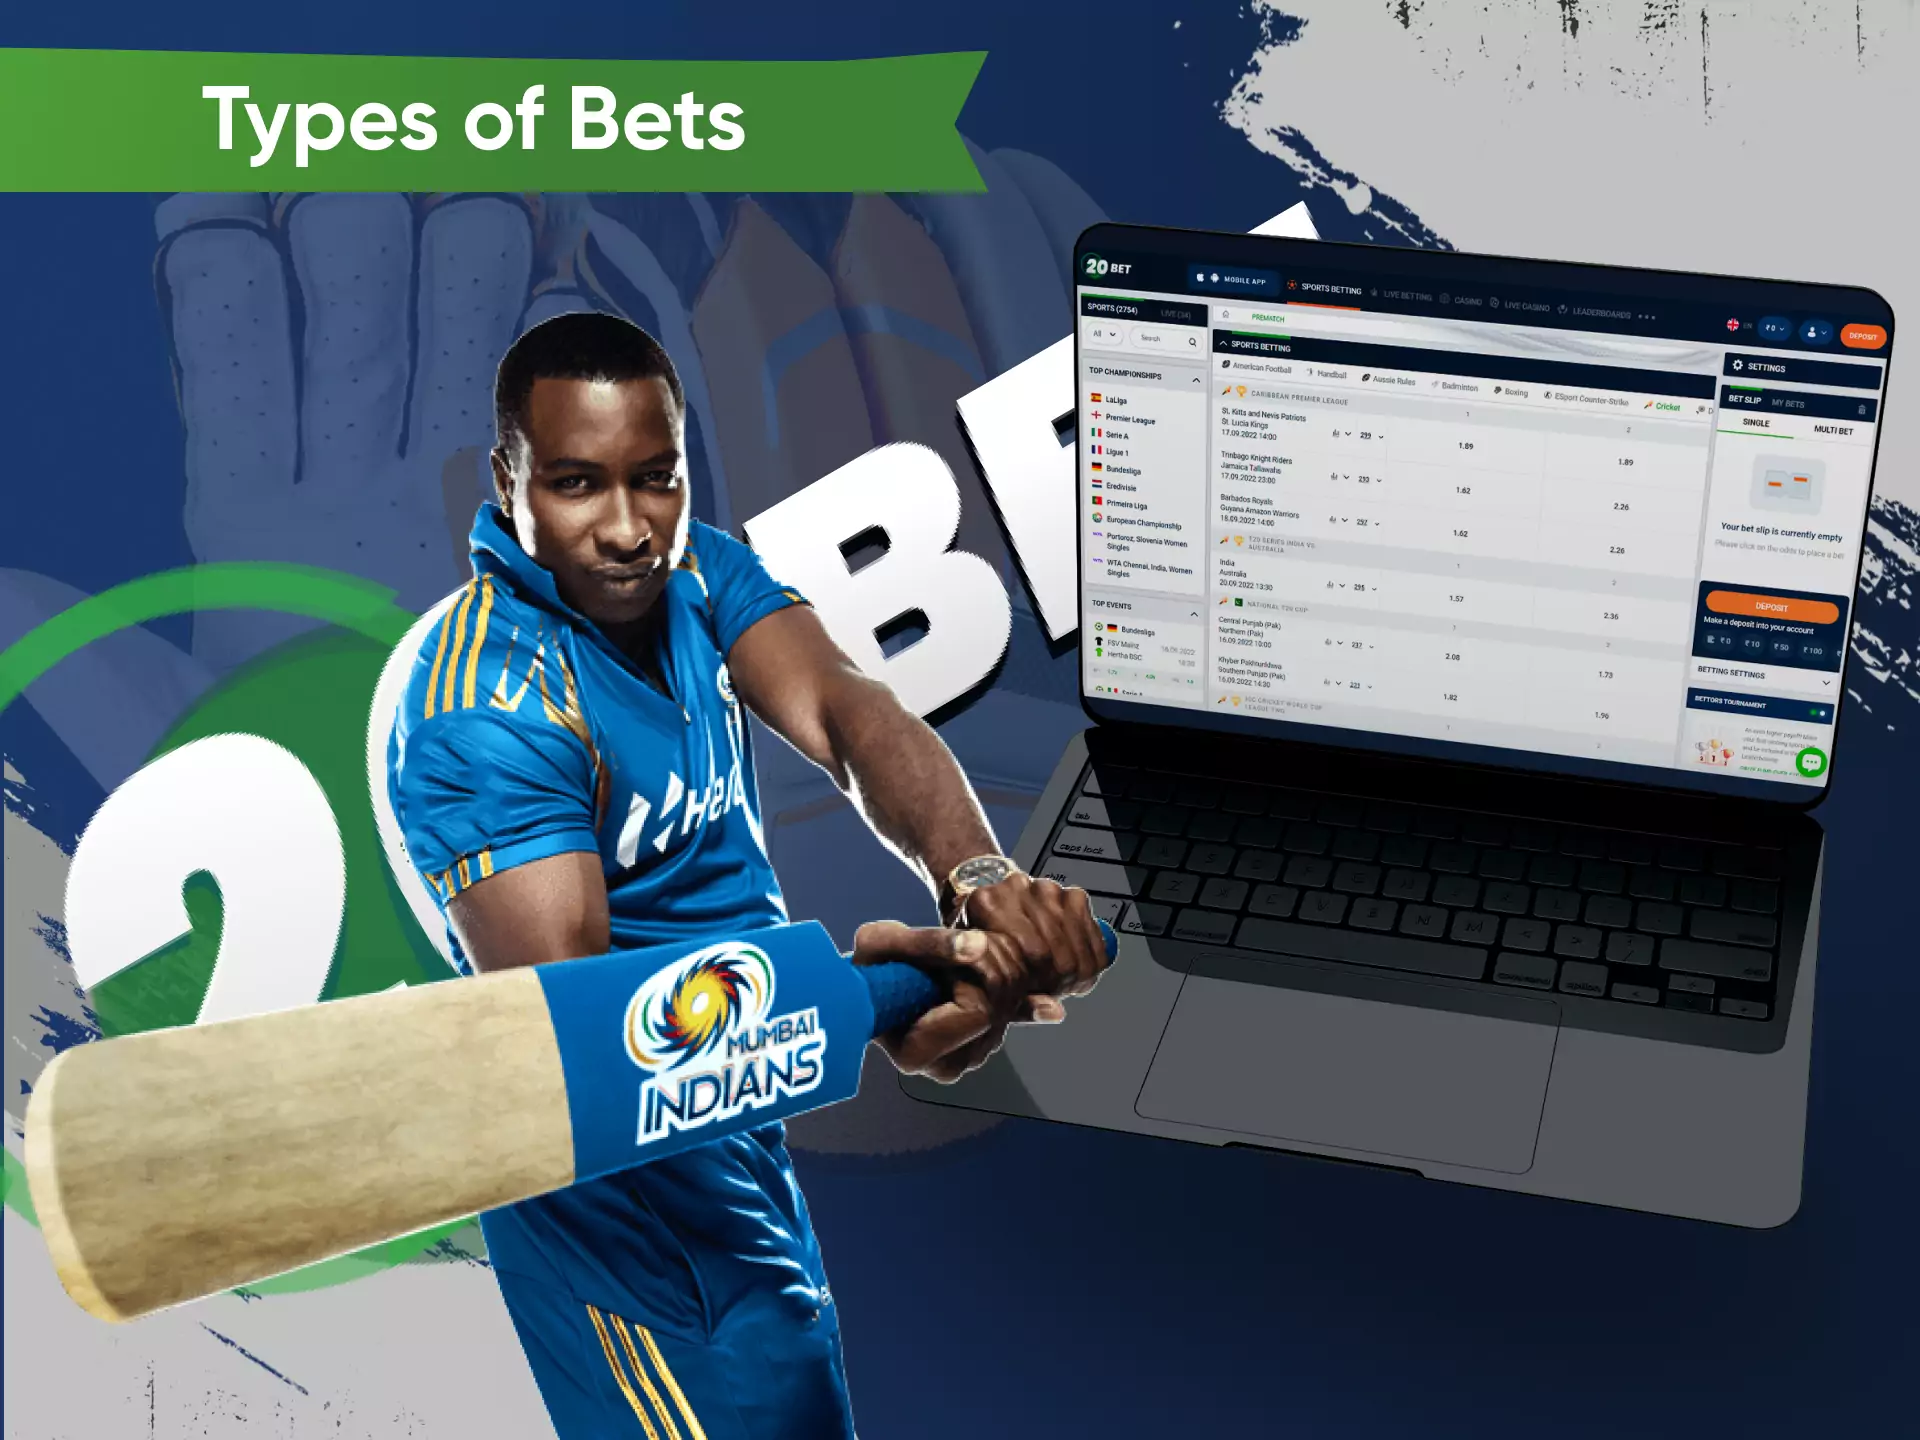 On 20bet, there are a lot of types of bets that you can use.